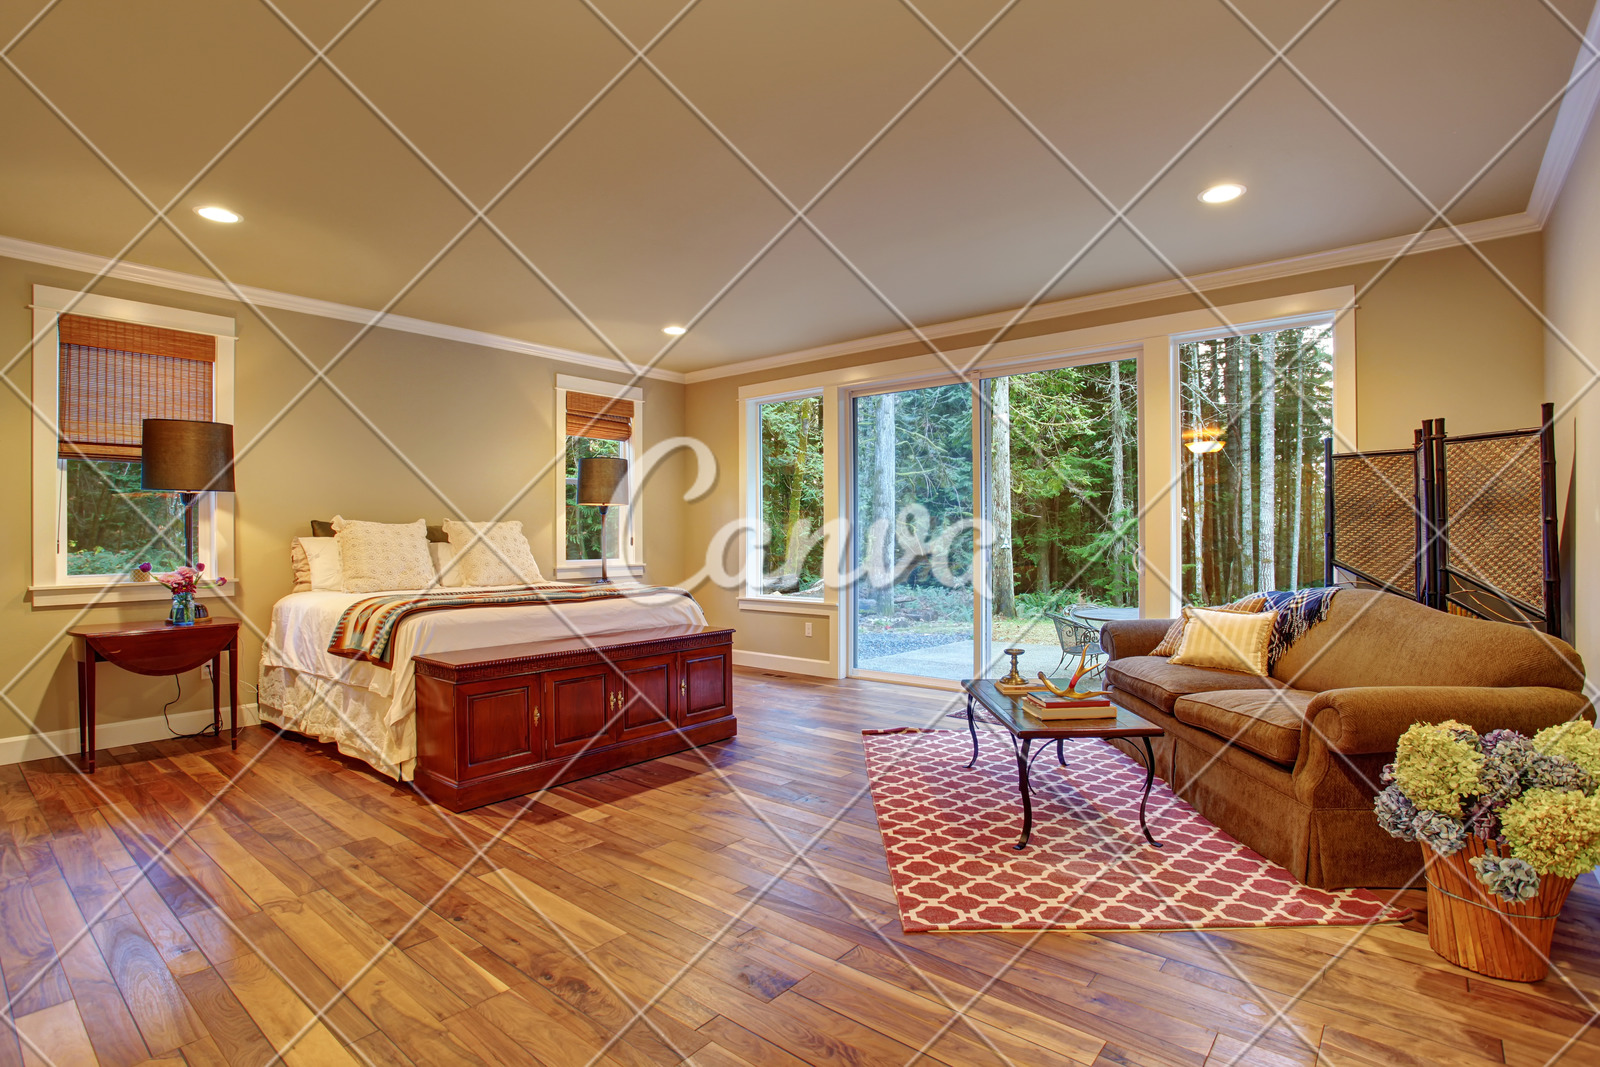 Large Master Bedroom Wth Hardwood Floor Photos By Canva